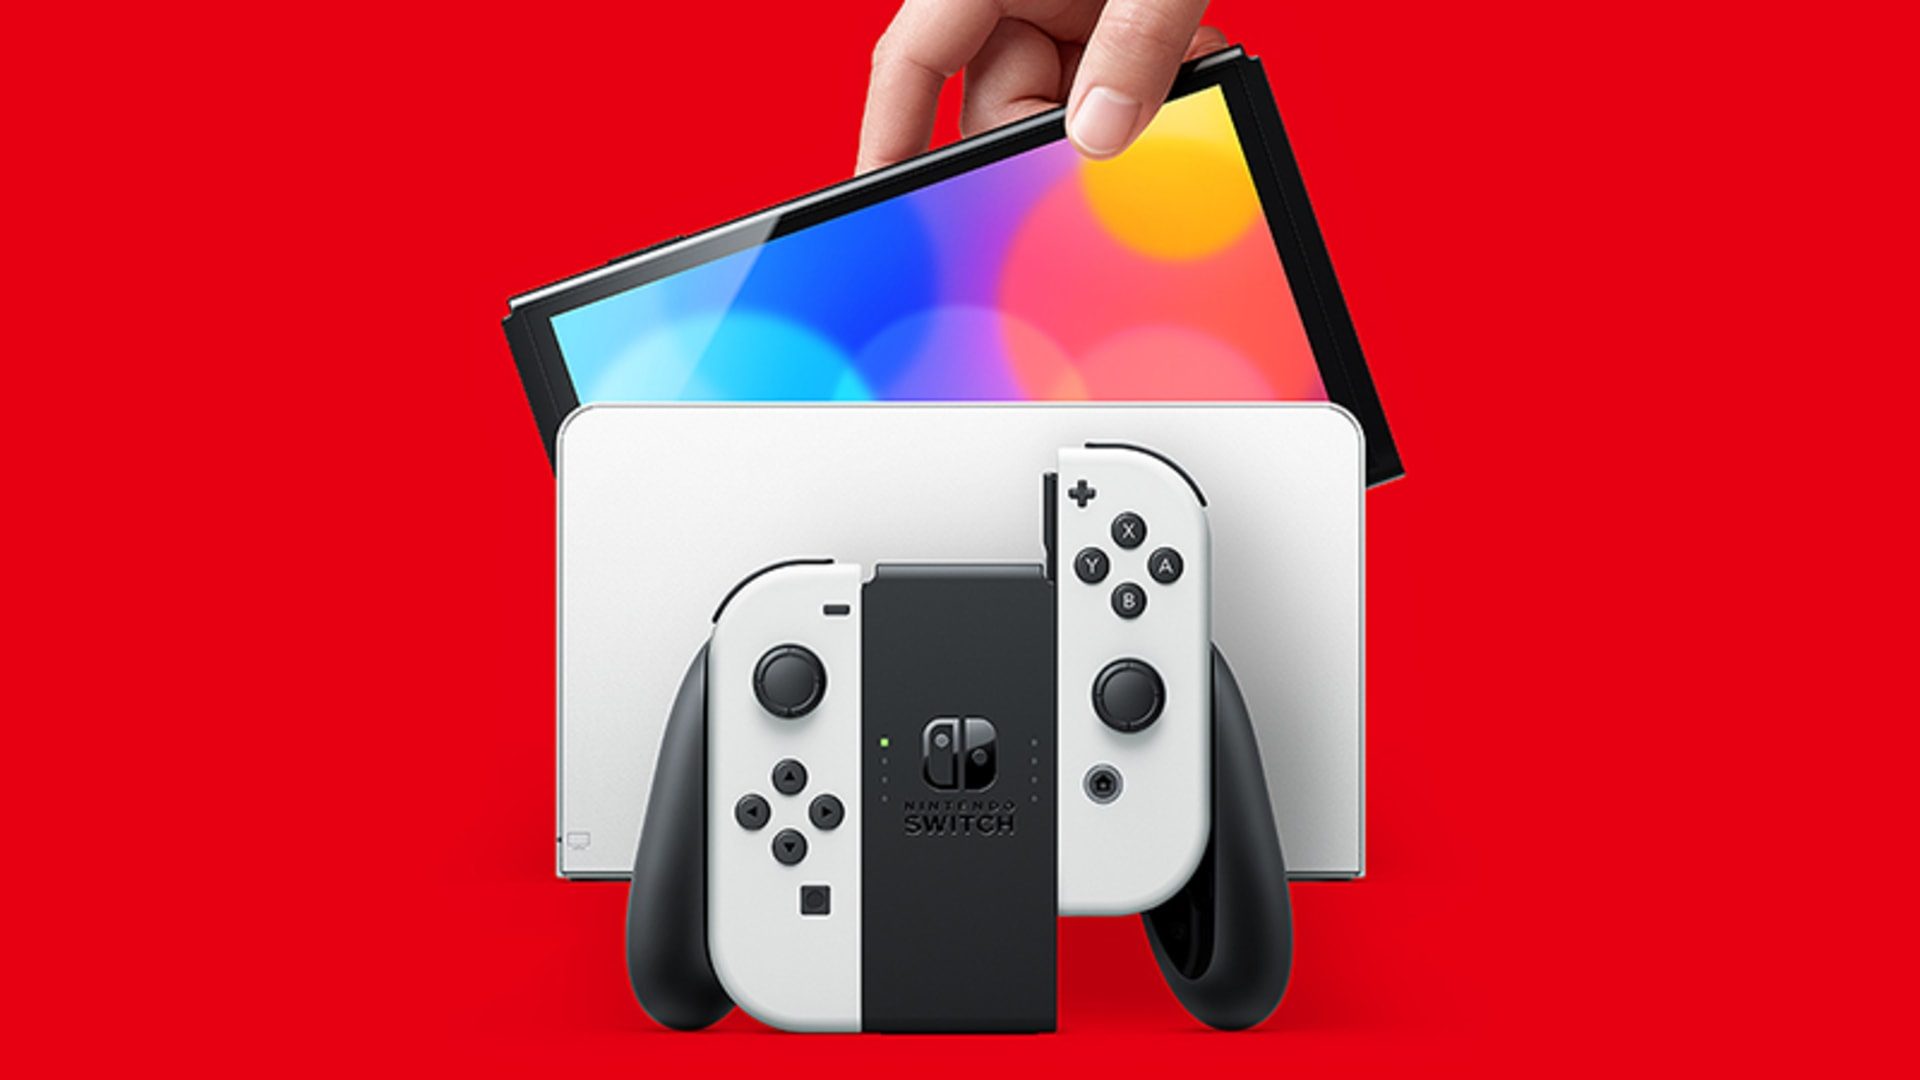 Nintendo Switch OLED model launches on October 8